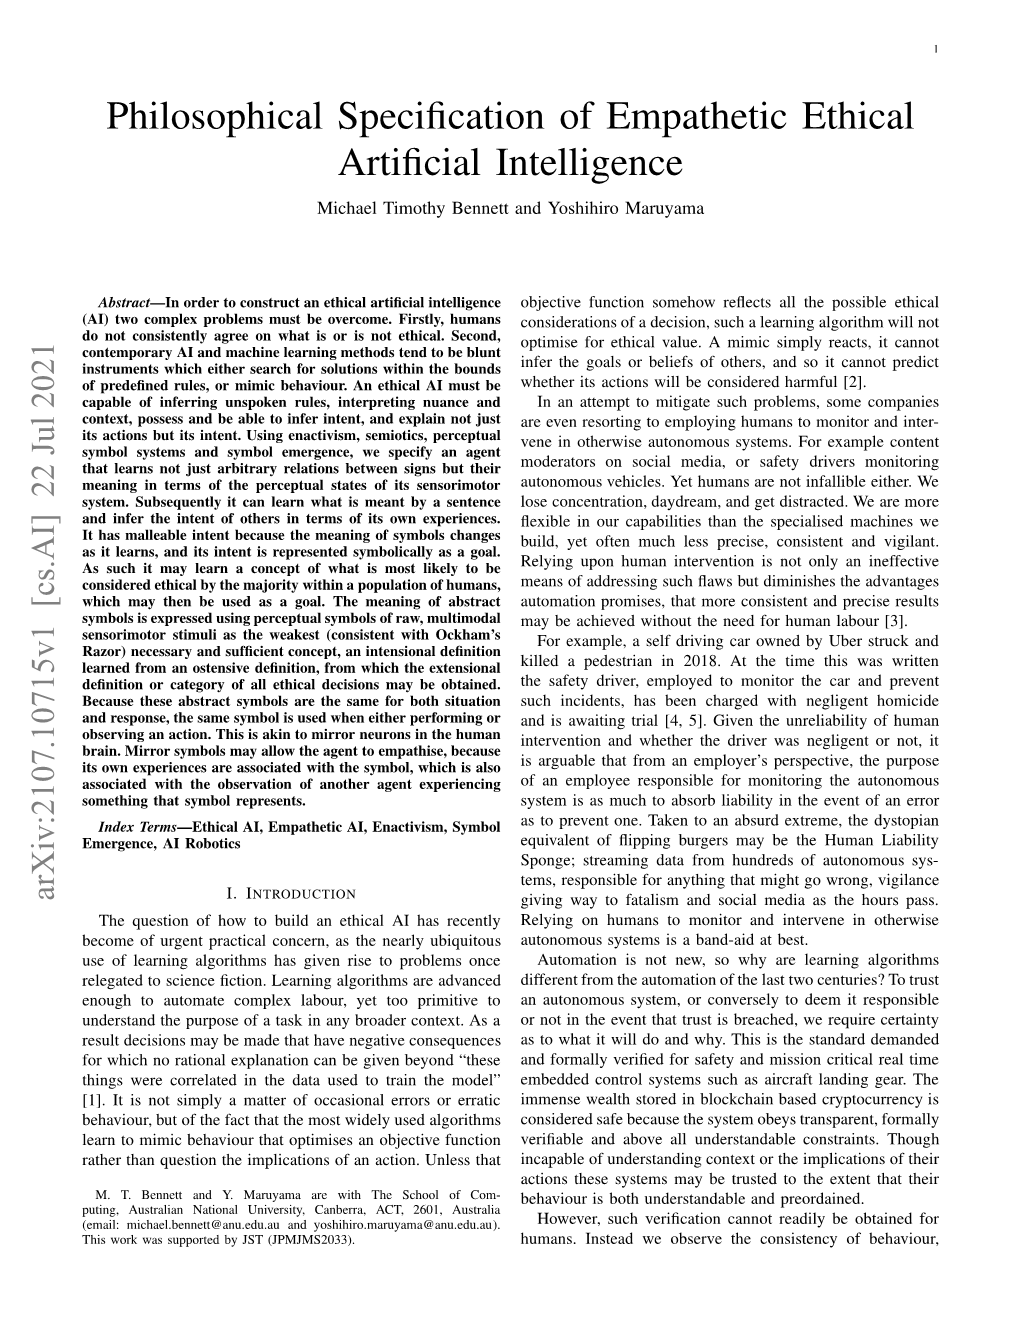 Philosophical Specification of Empathetic Ethical Artificial Intelligence